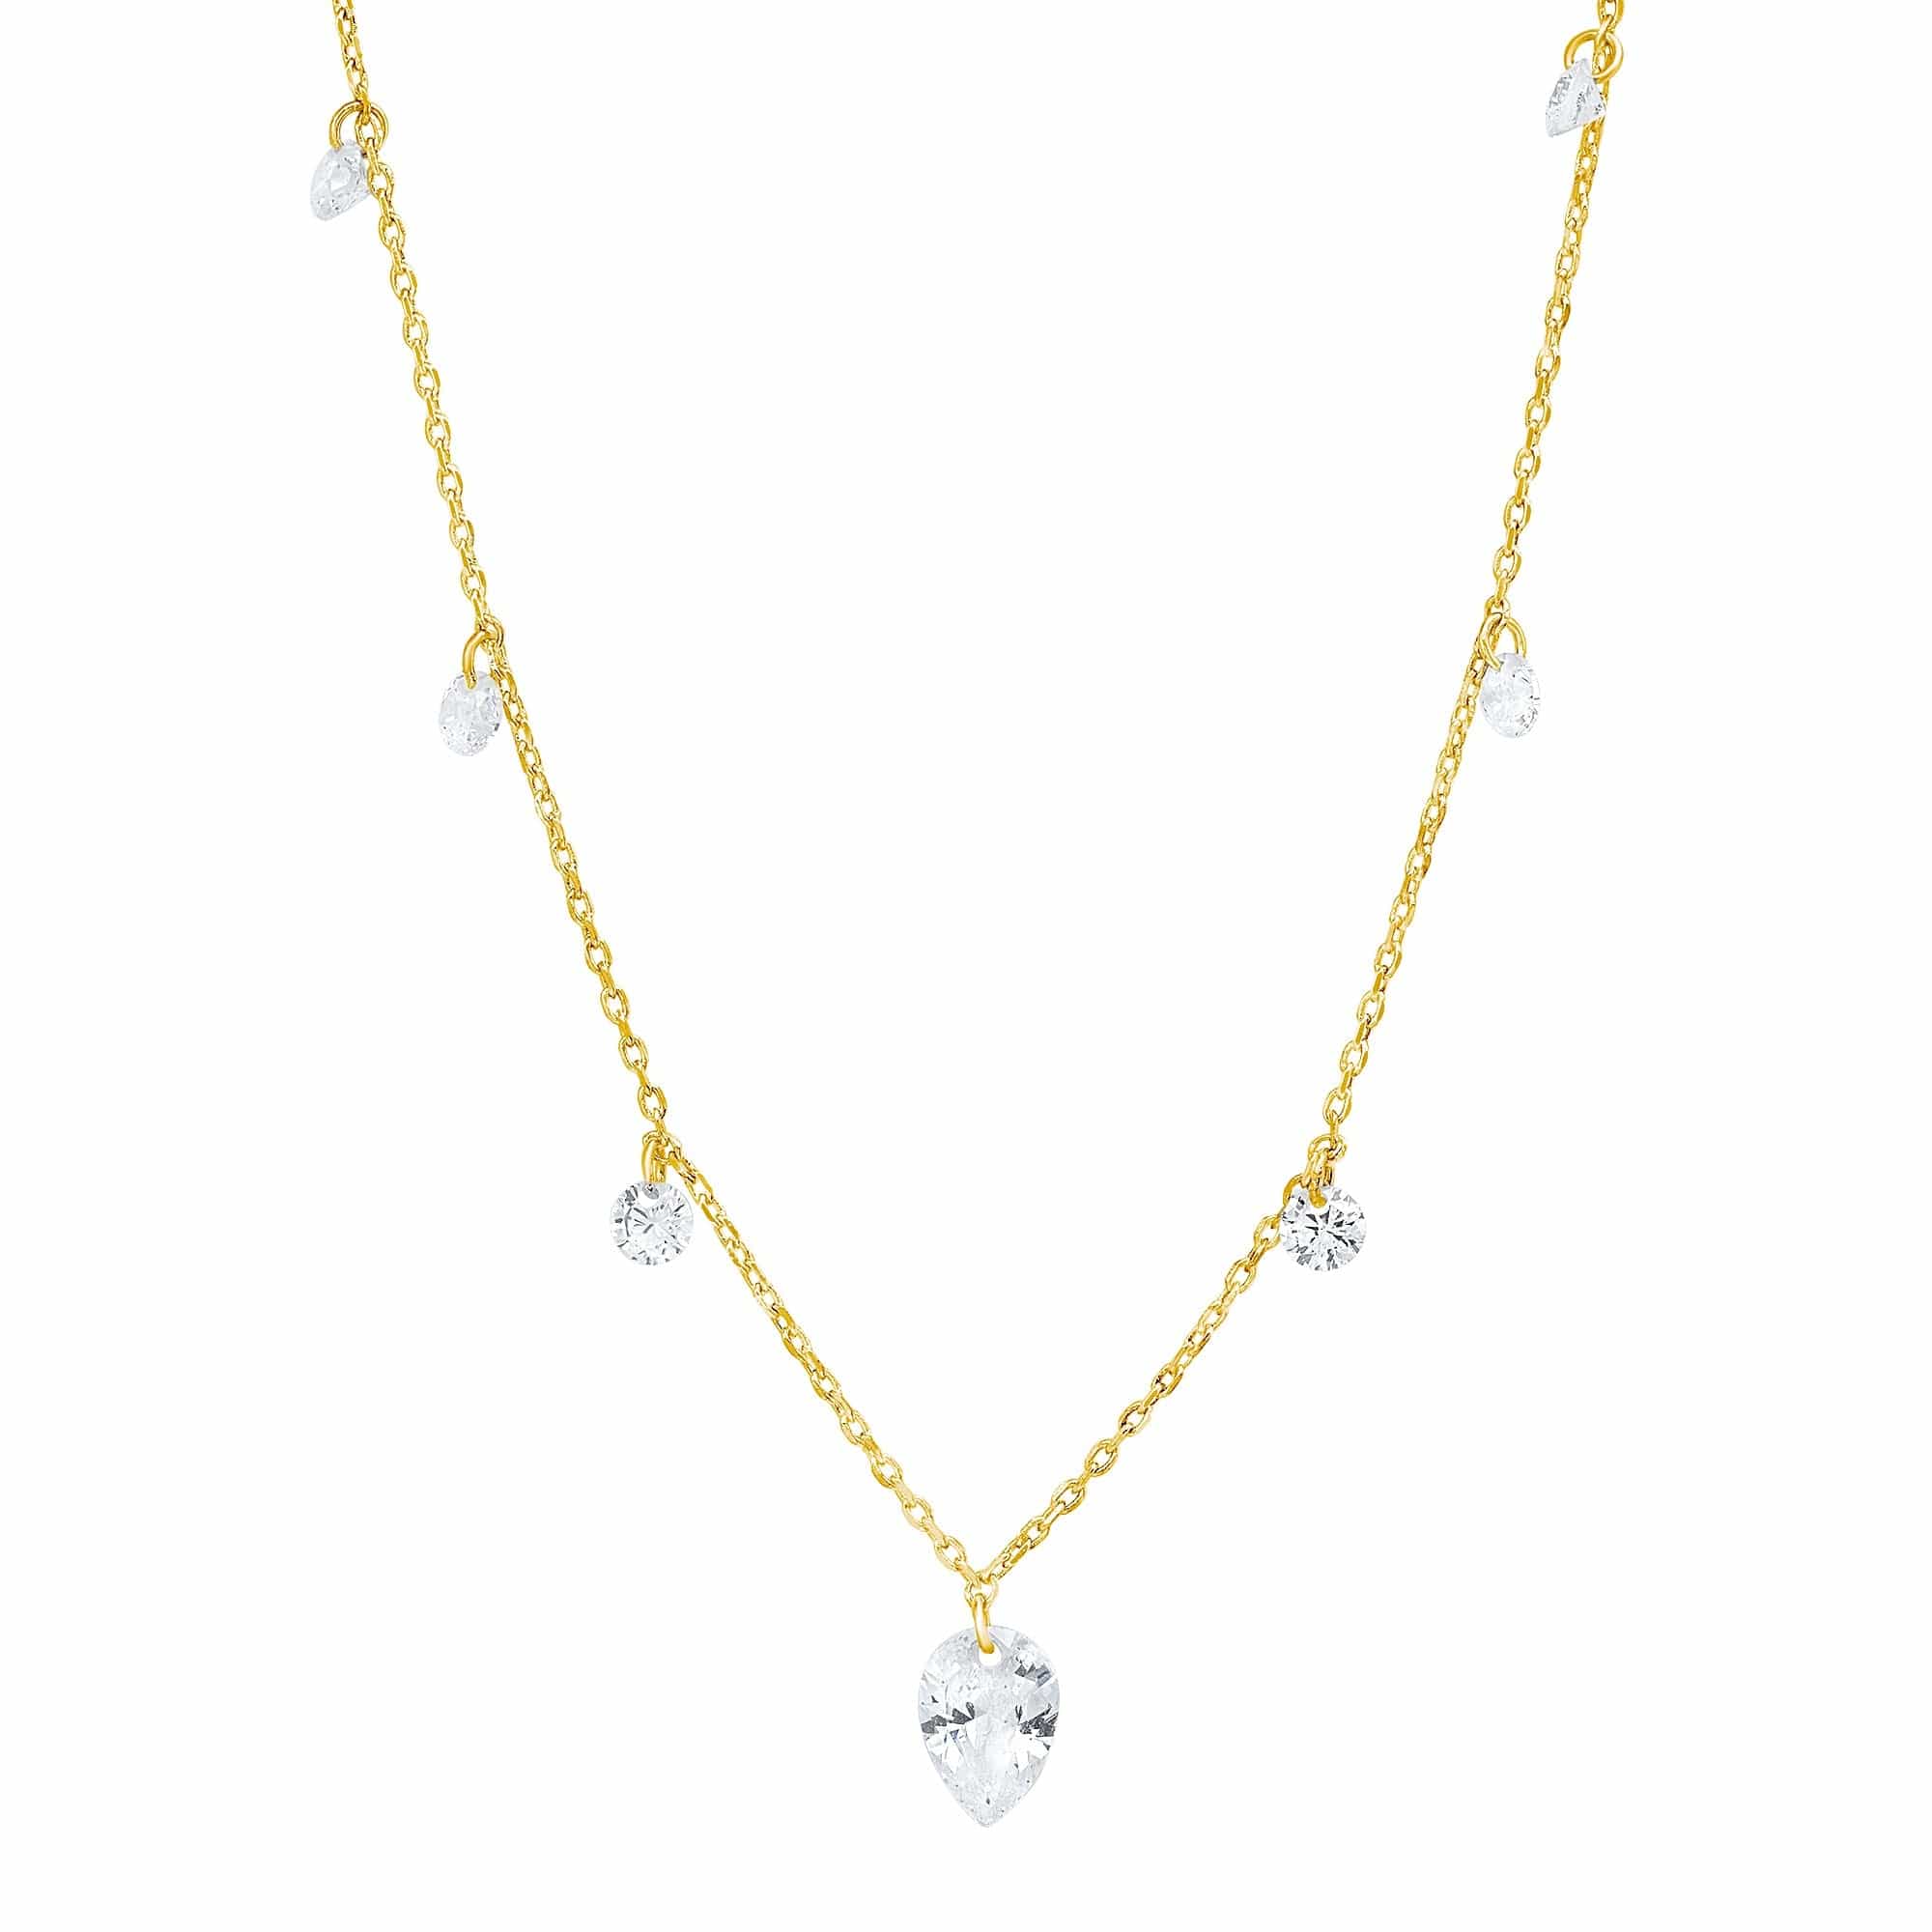 TAI JEWELRY Necklace Gold Floating Cz Station Necklace With Pear Shaped Cz Pendant